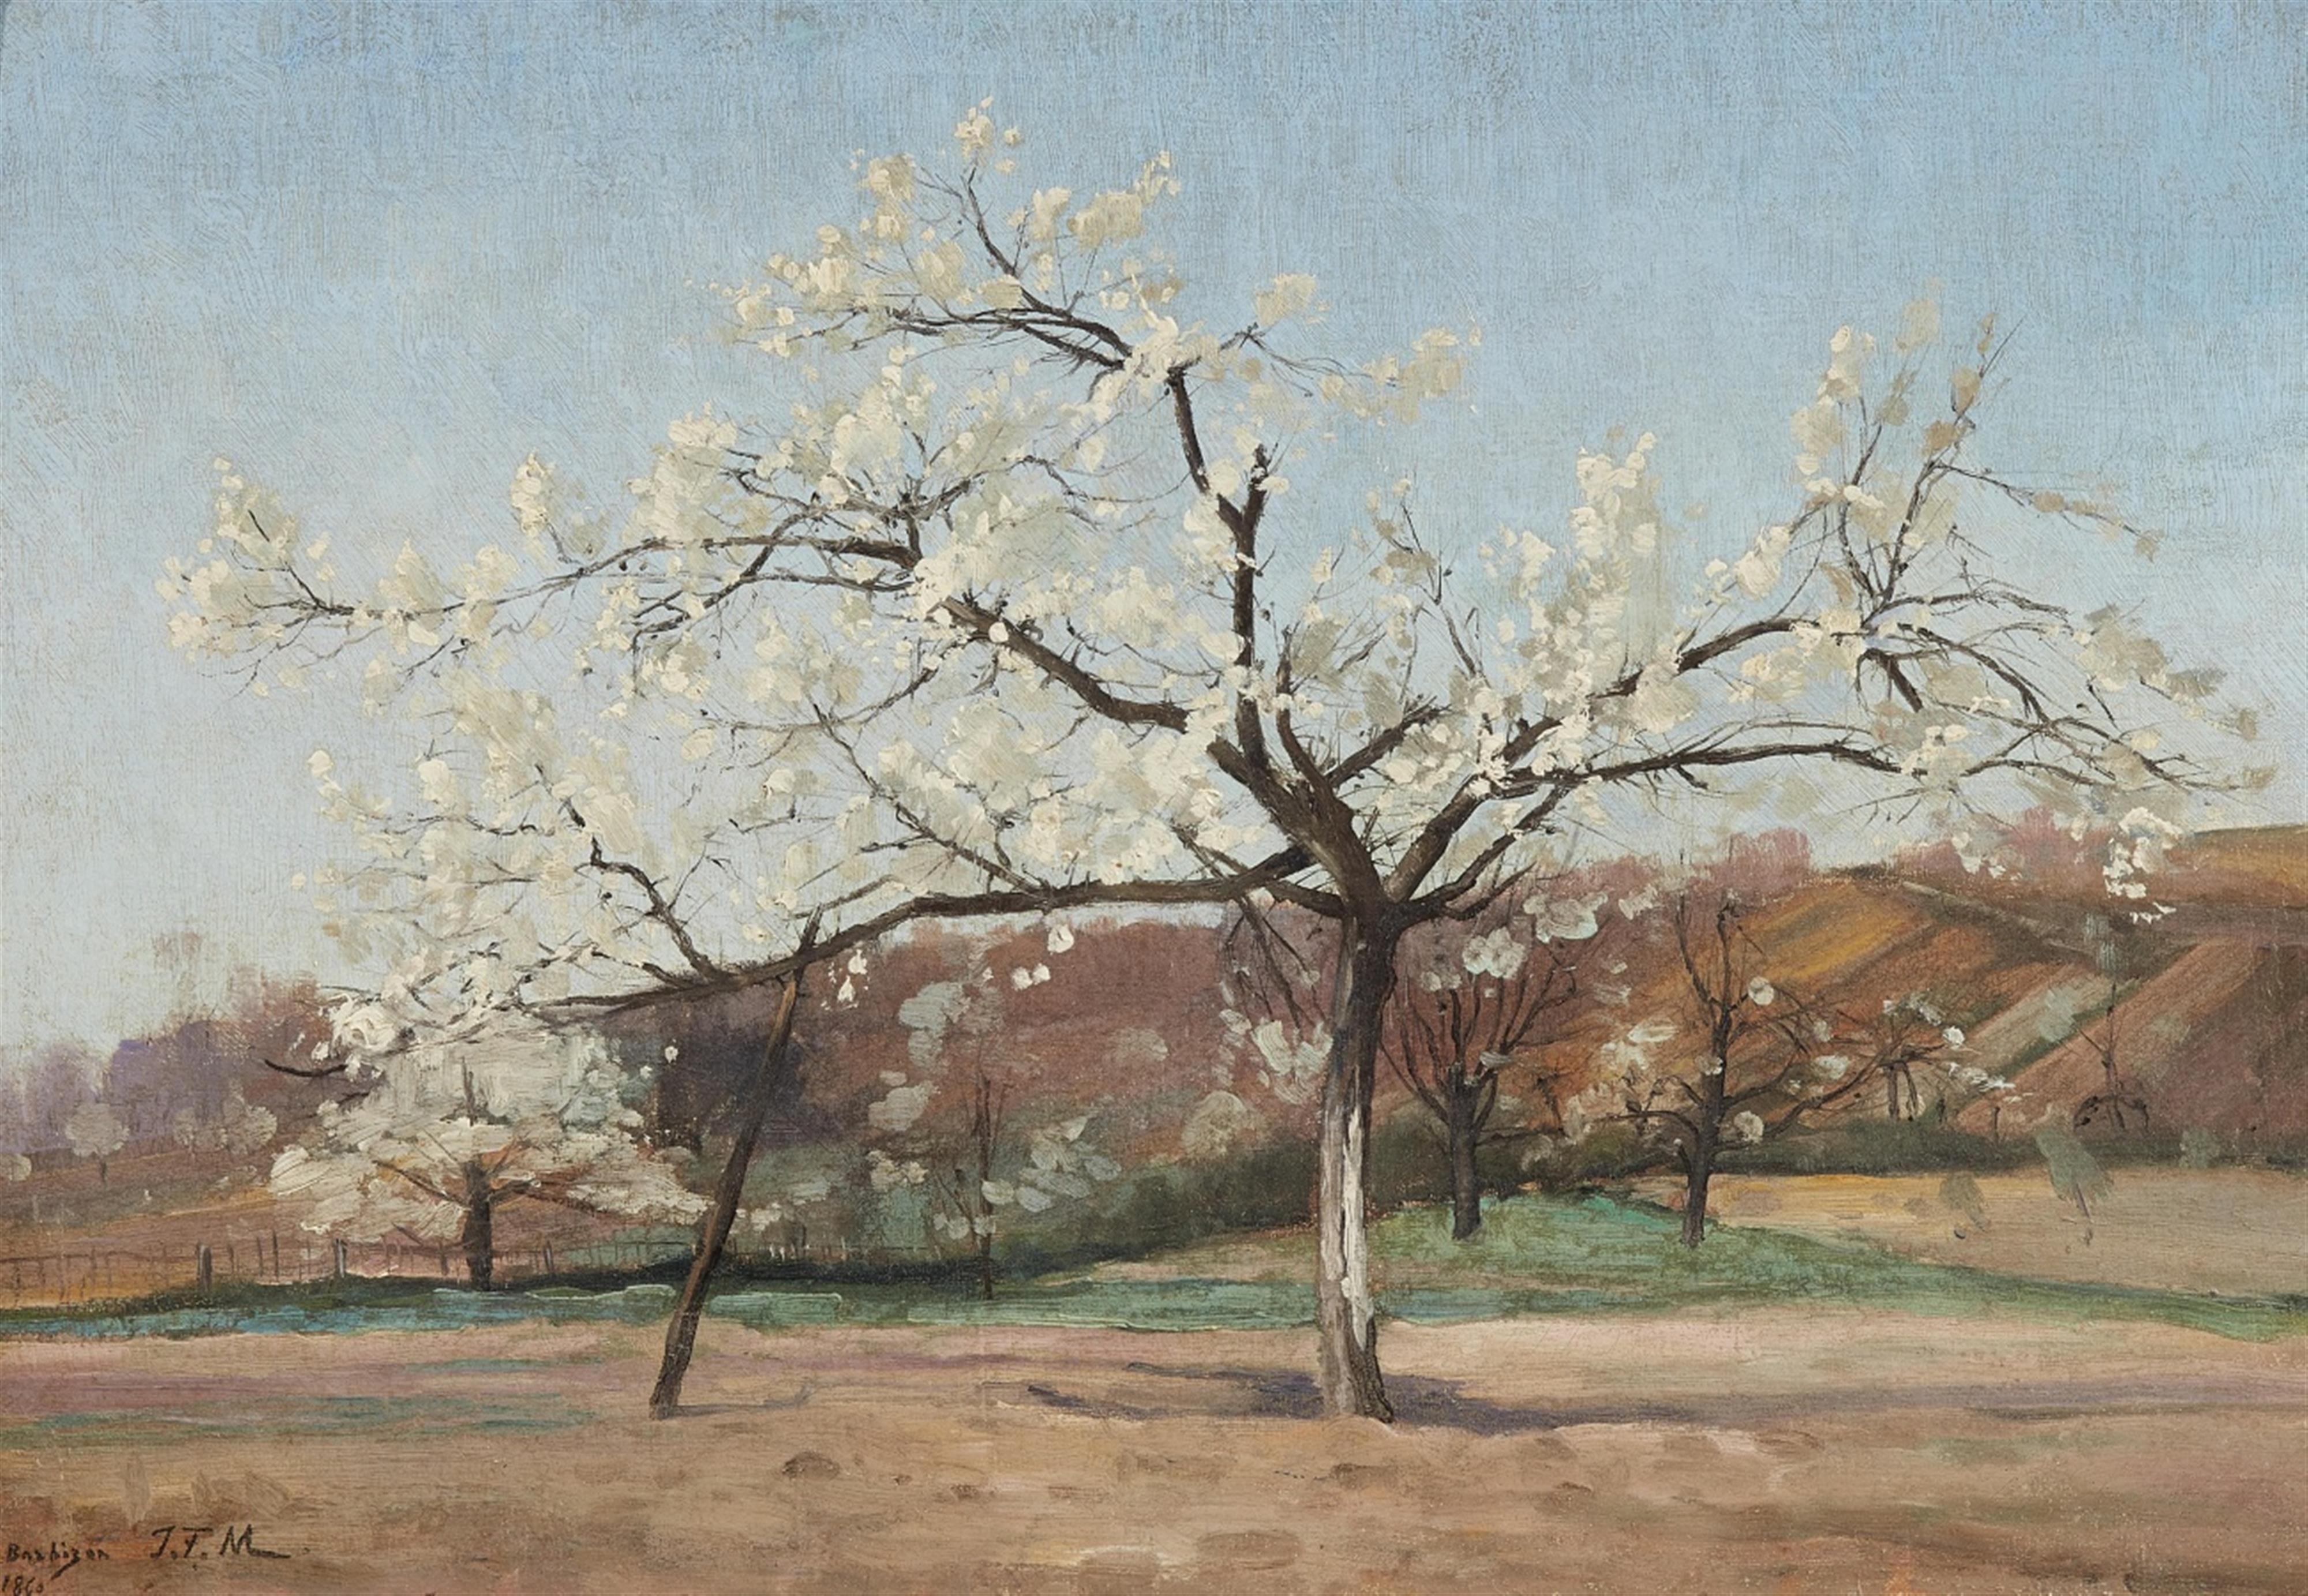 Jean François Millet, attributed to - A Flowering Apple Tree - image-1